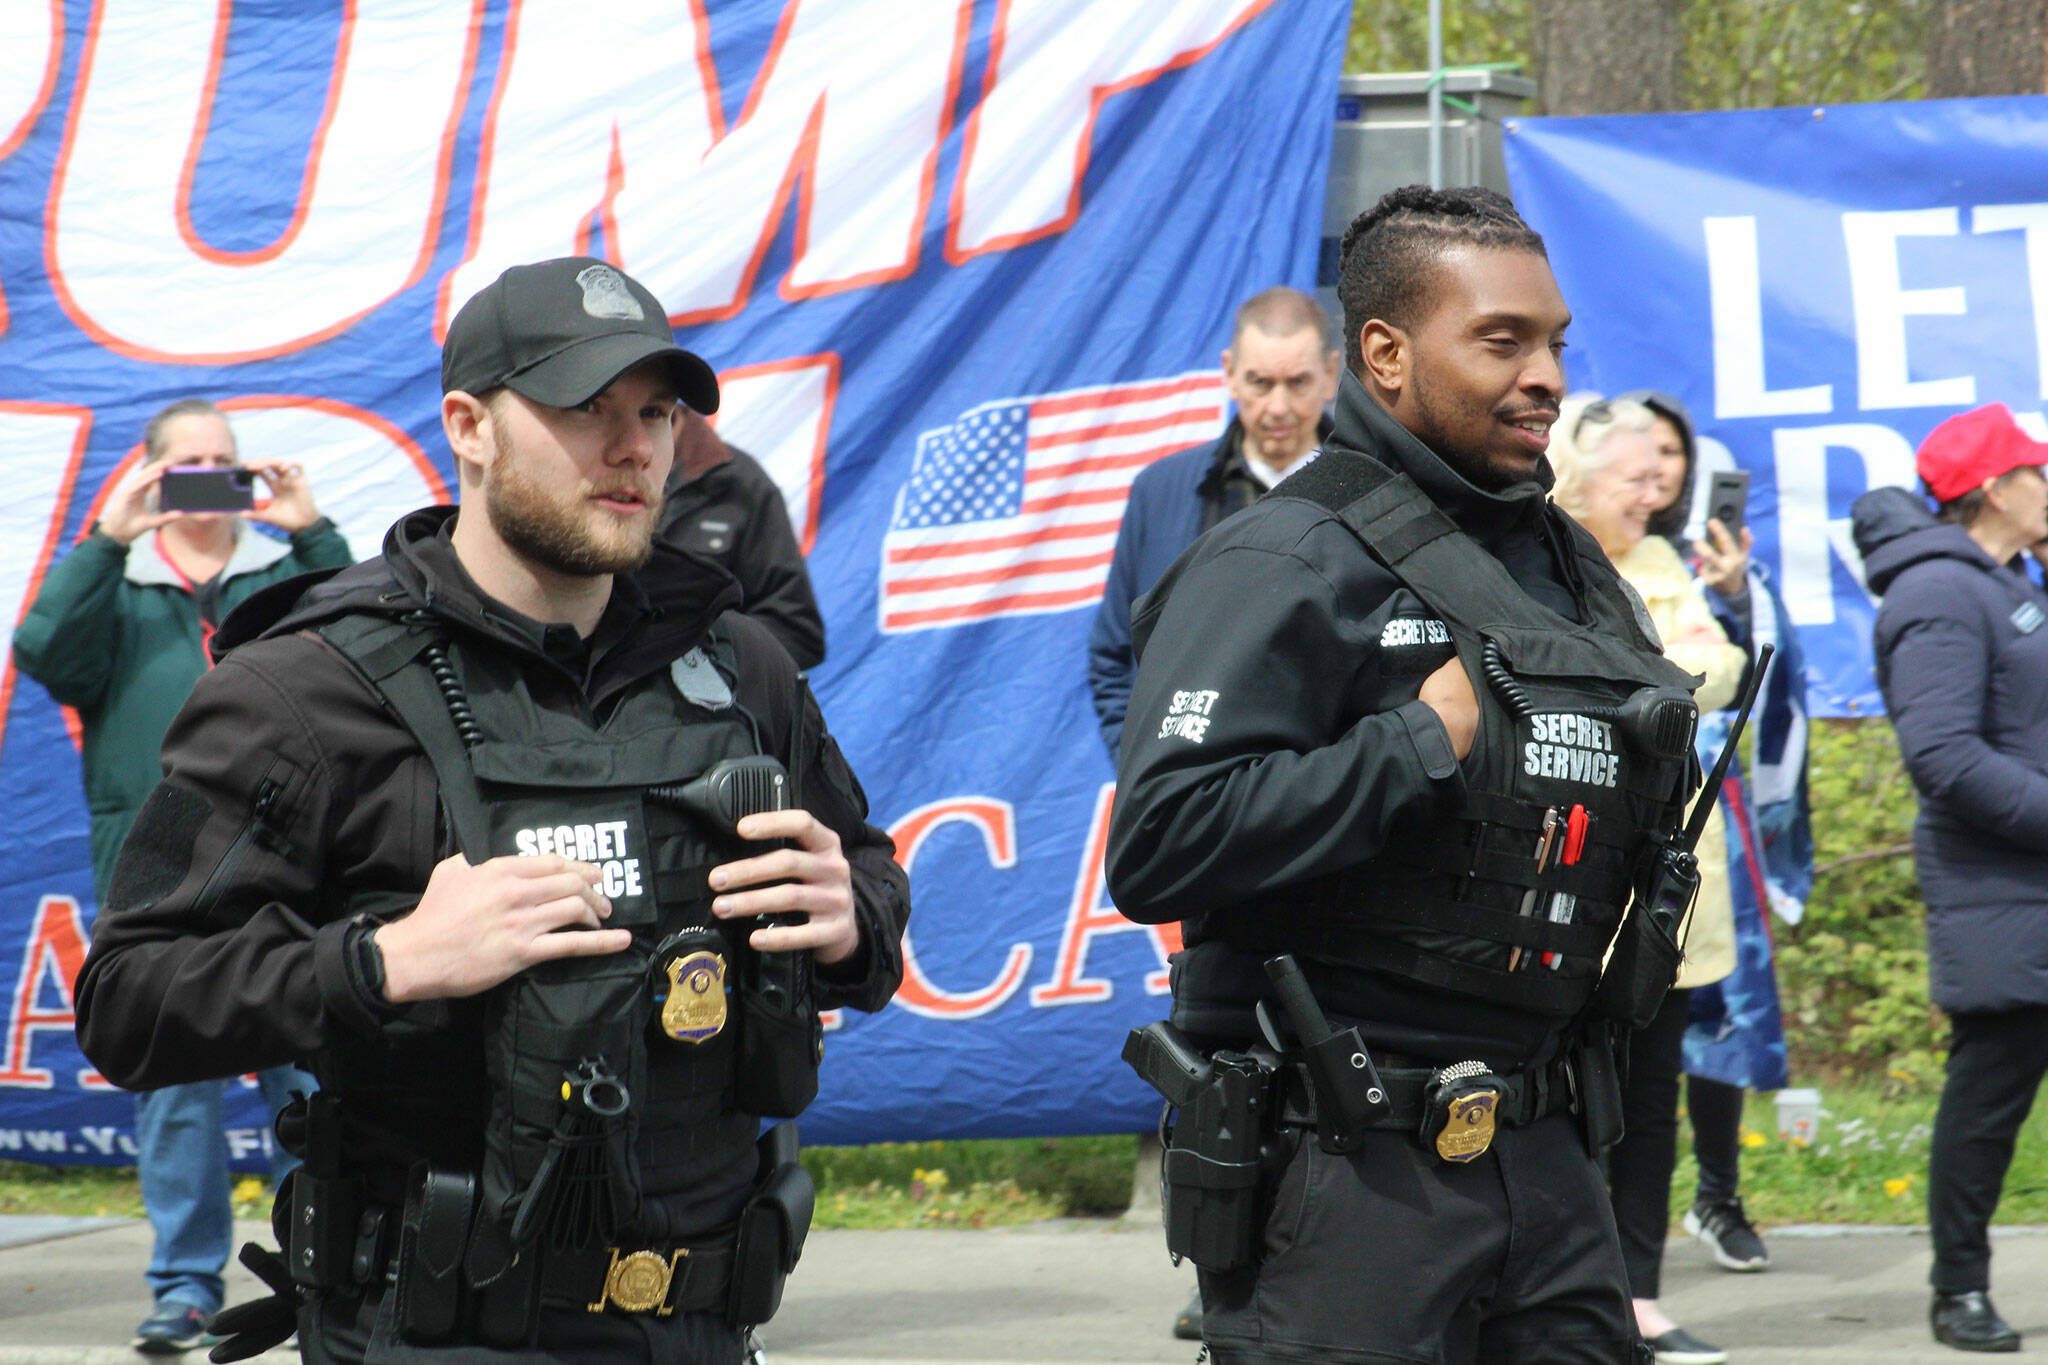 Two Secret Service agents patrol the crowd outside Green River College. Photo by Alex Bruell/Sound Publishing